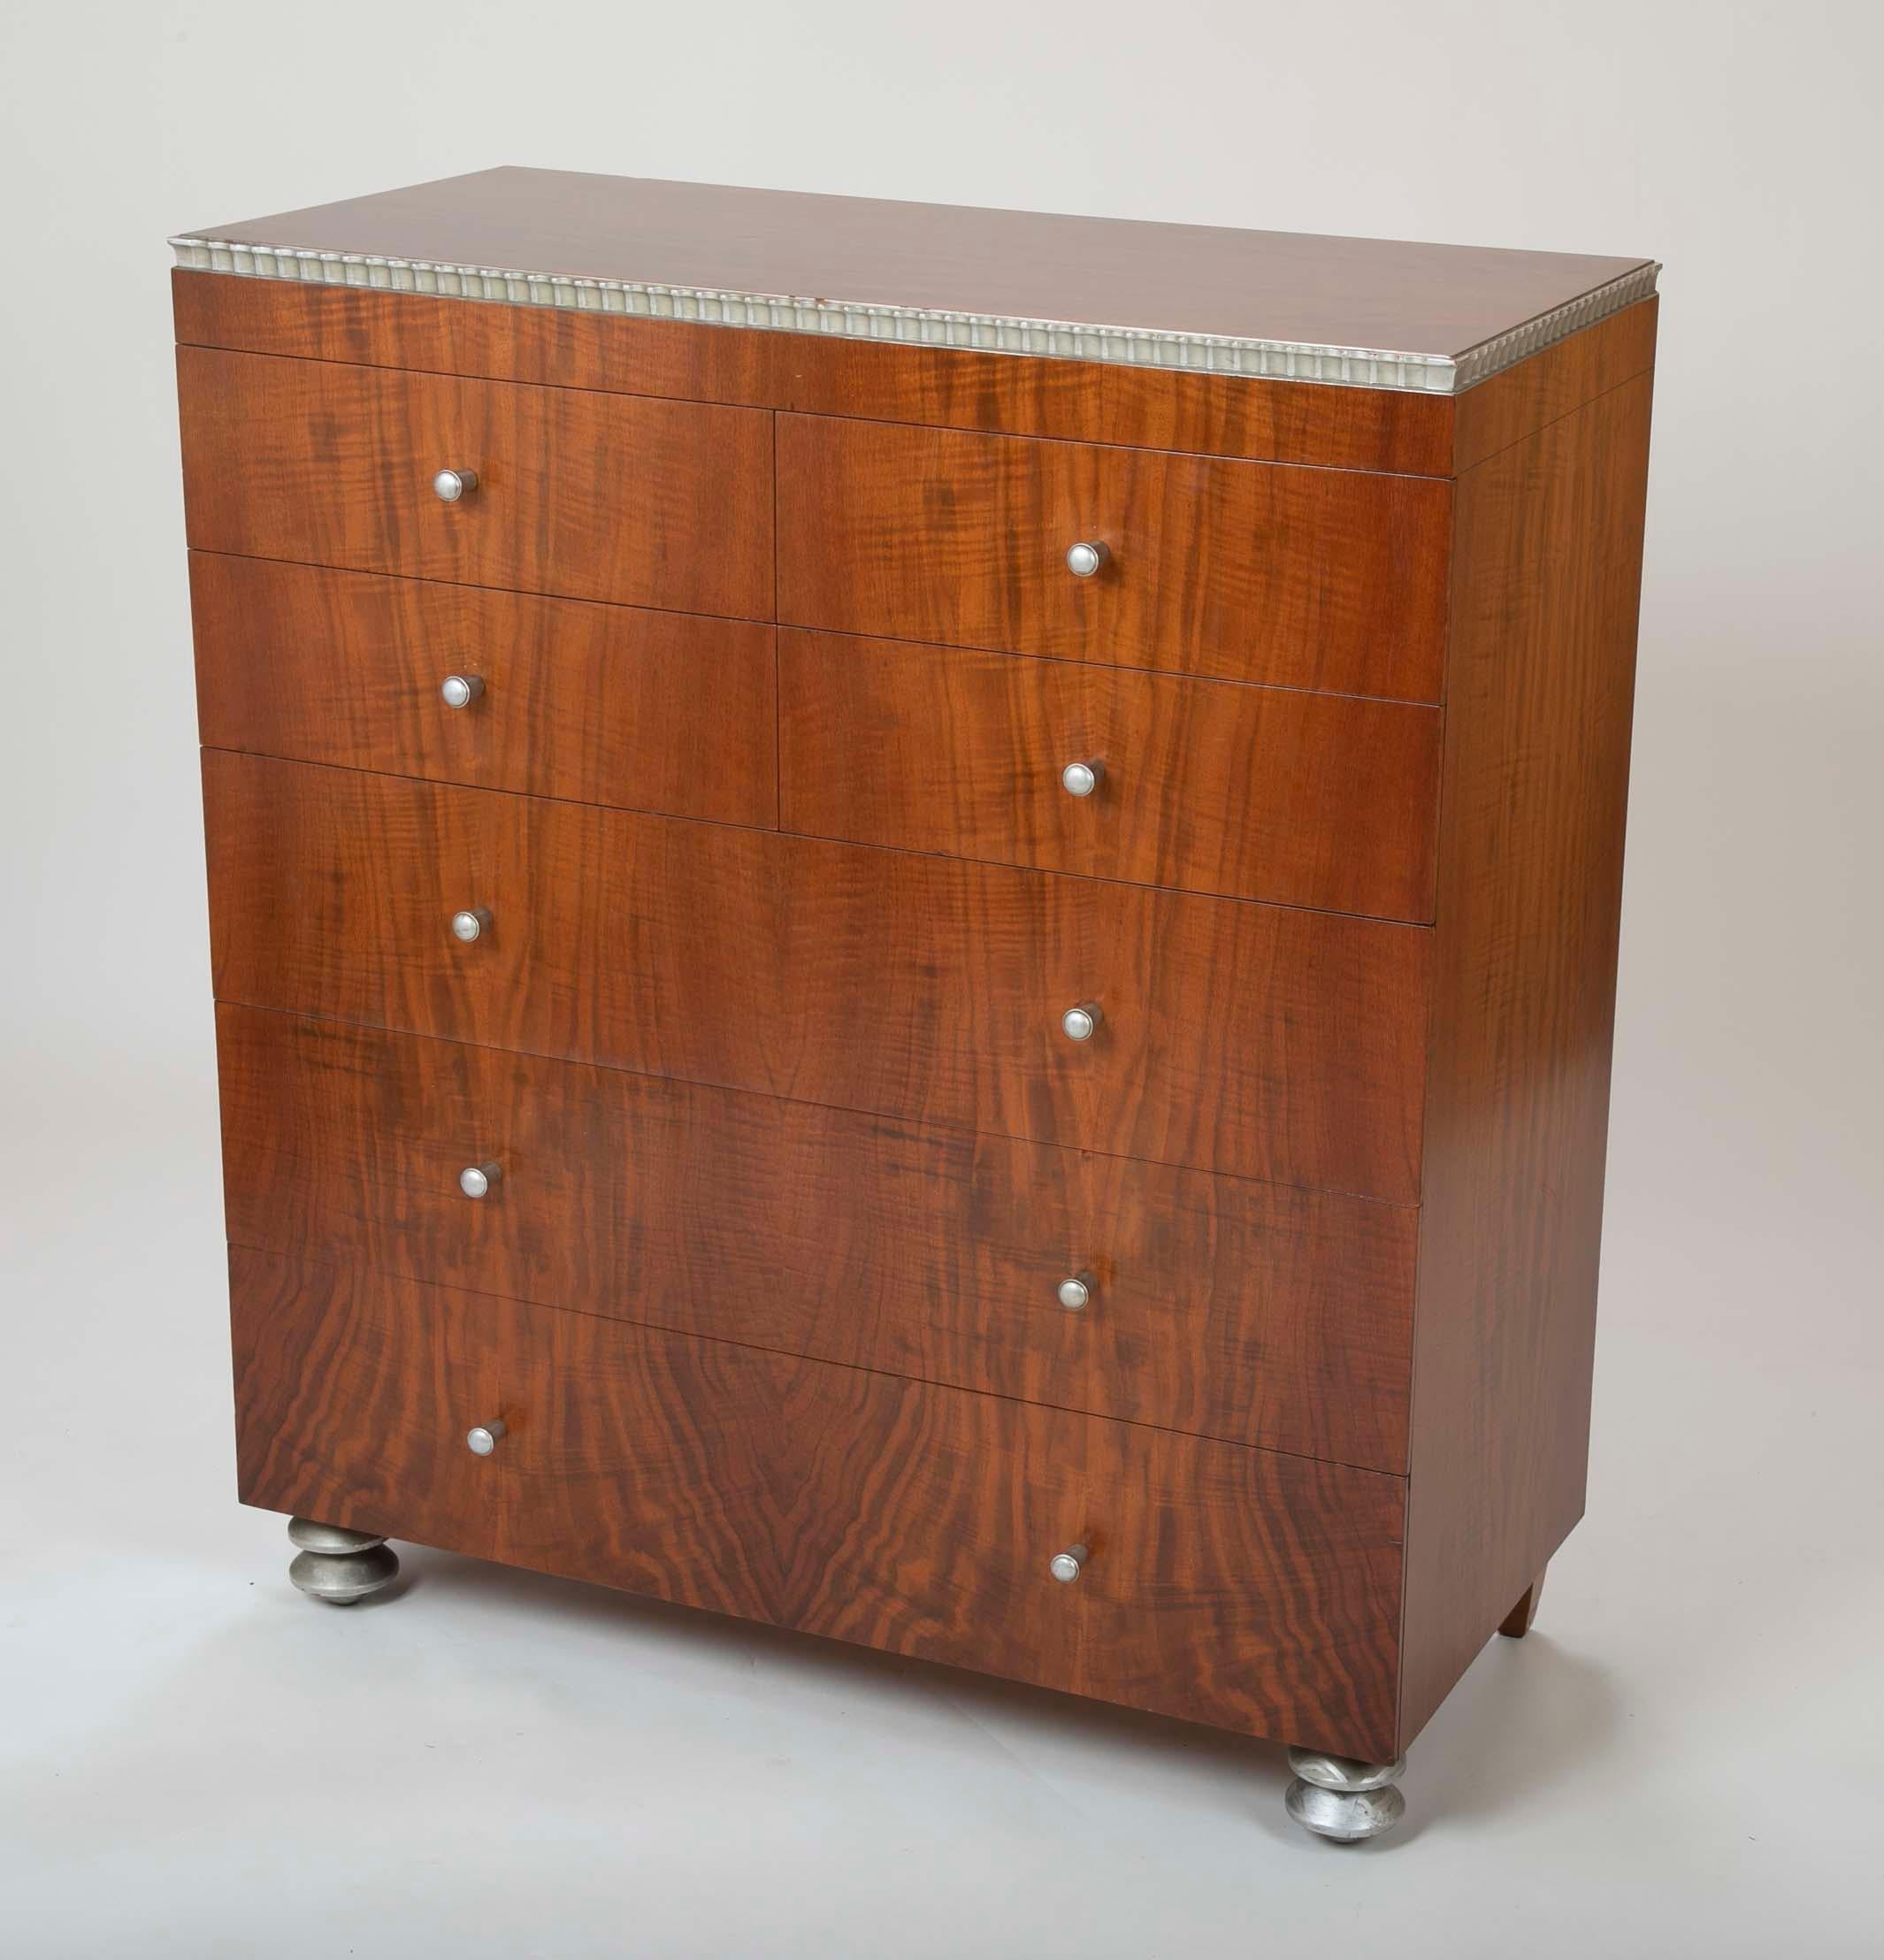 A handsome American Modernist tall chest of drawers. With beautiful flame walnut veneer and silver painted highlights, the epitome of modern design.
Retailed by Paine Furniture Company of Boston. We also have a single bed from the same